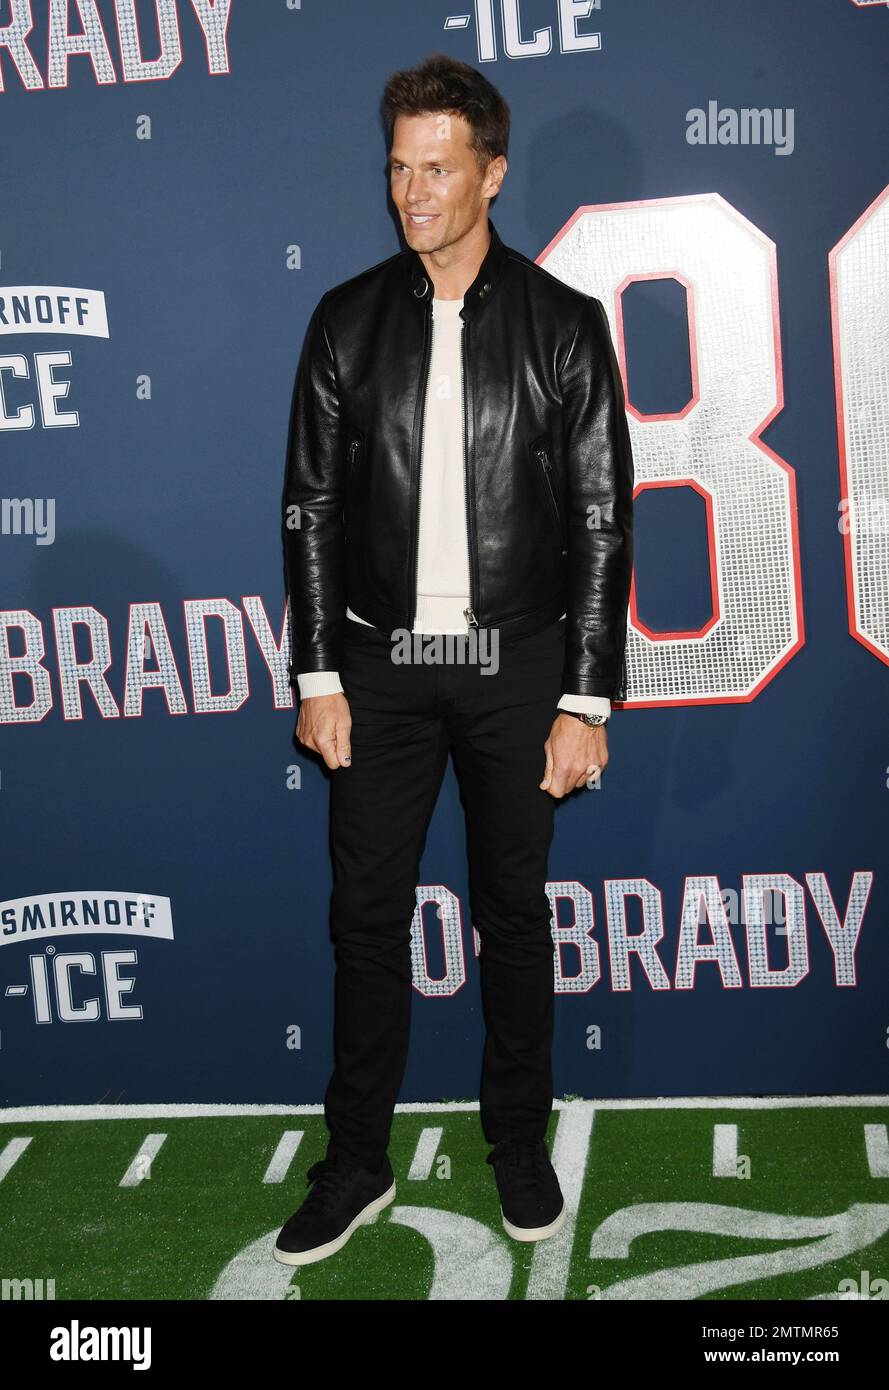 LOS ANGELES, CA - JANUARY 31: Tom Brady attends the Los Angeles premiere screening of Paramount Pictures' '80 for Brady' at Regency Village Theatre on Stock Photo